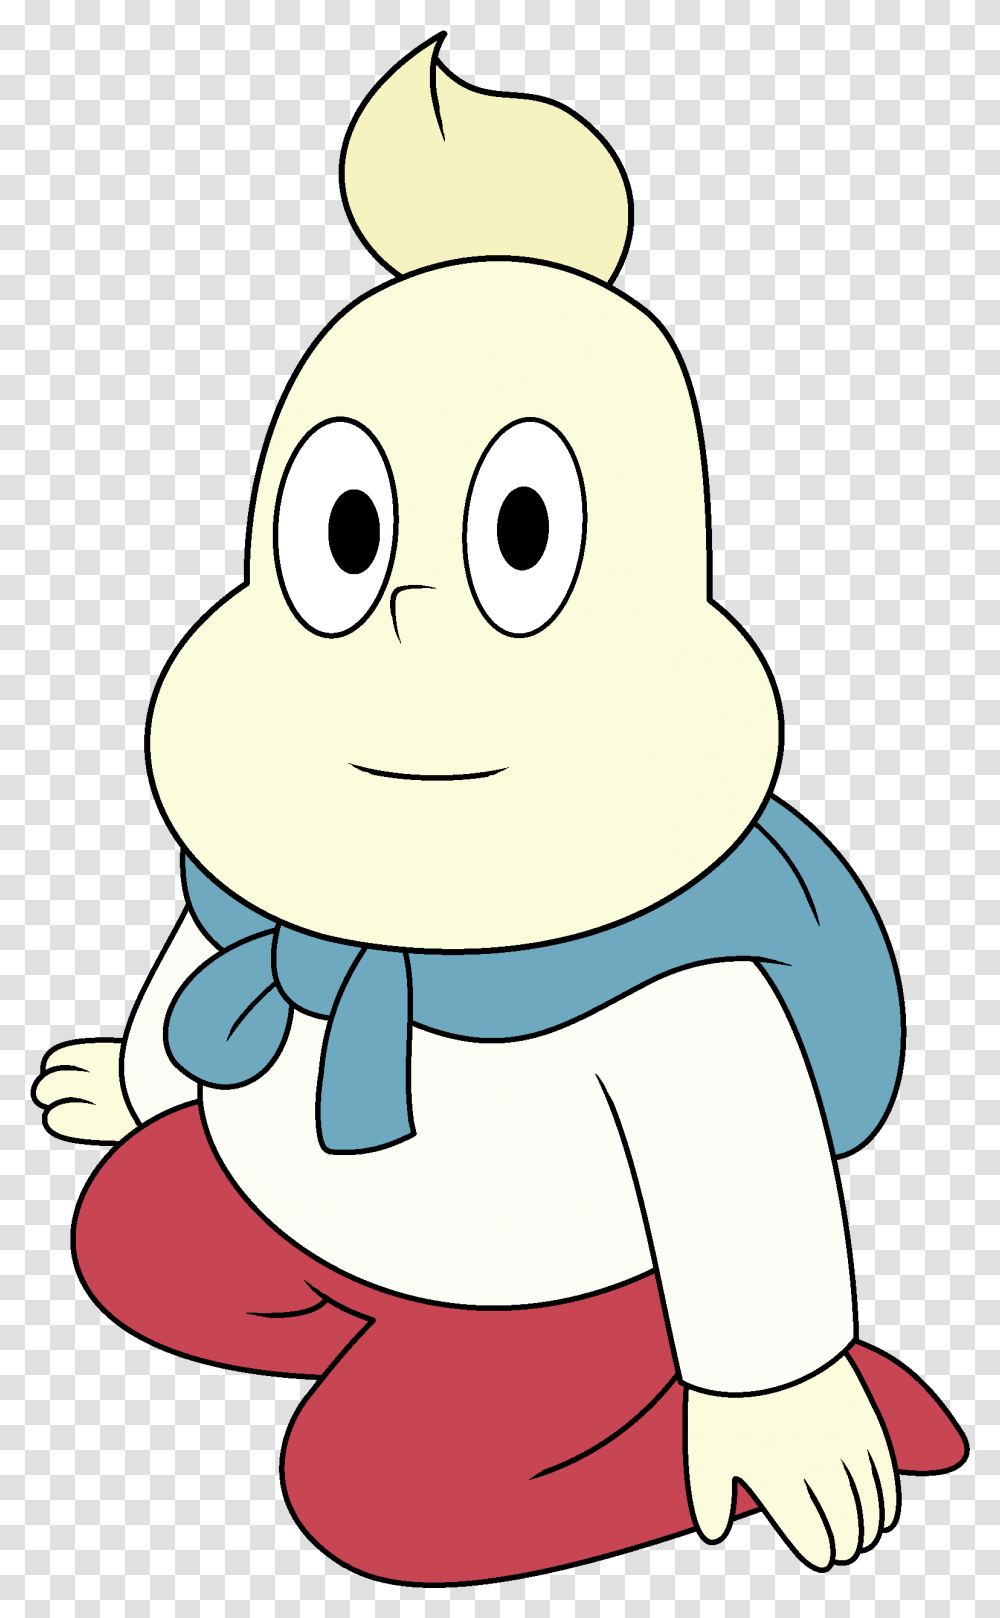 Onion Is White Diamond Onion Steven Universe, Snowman, Outdoors, Nature, Drawing Transparent Png